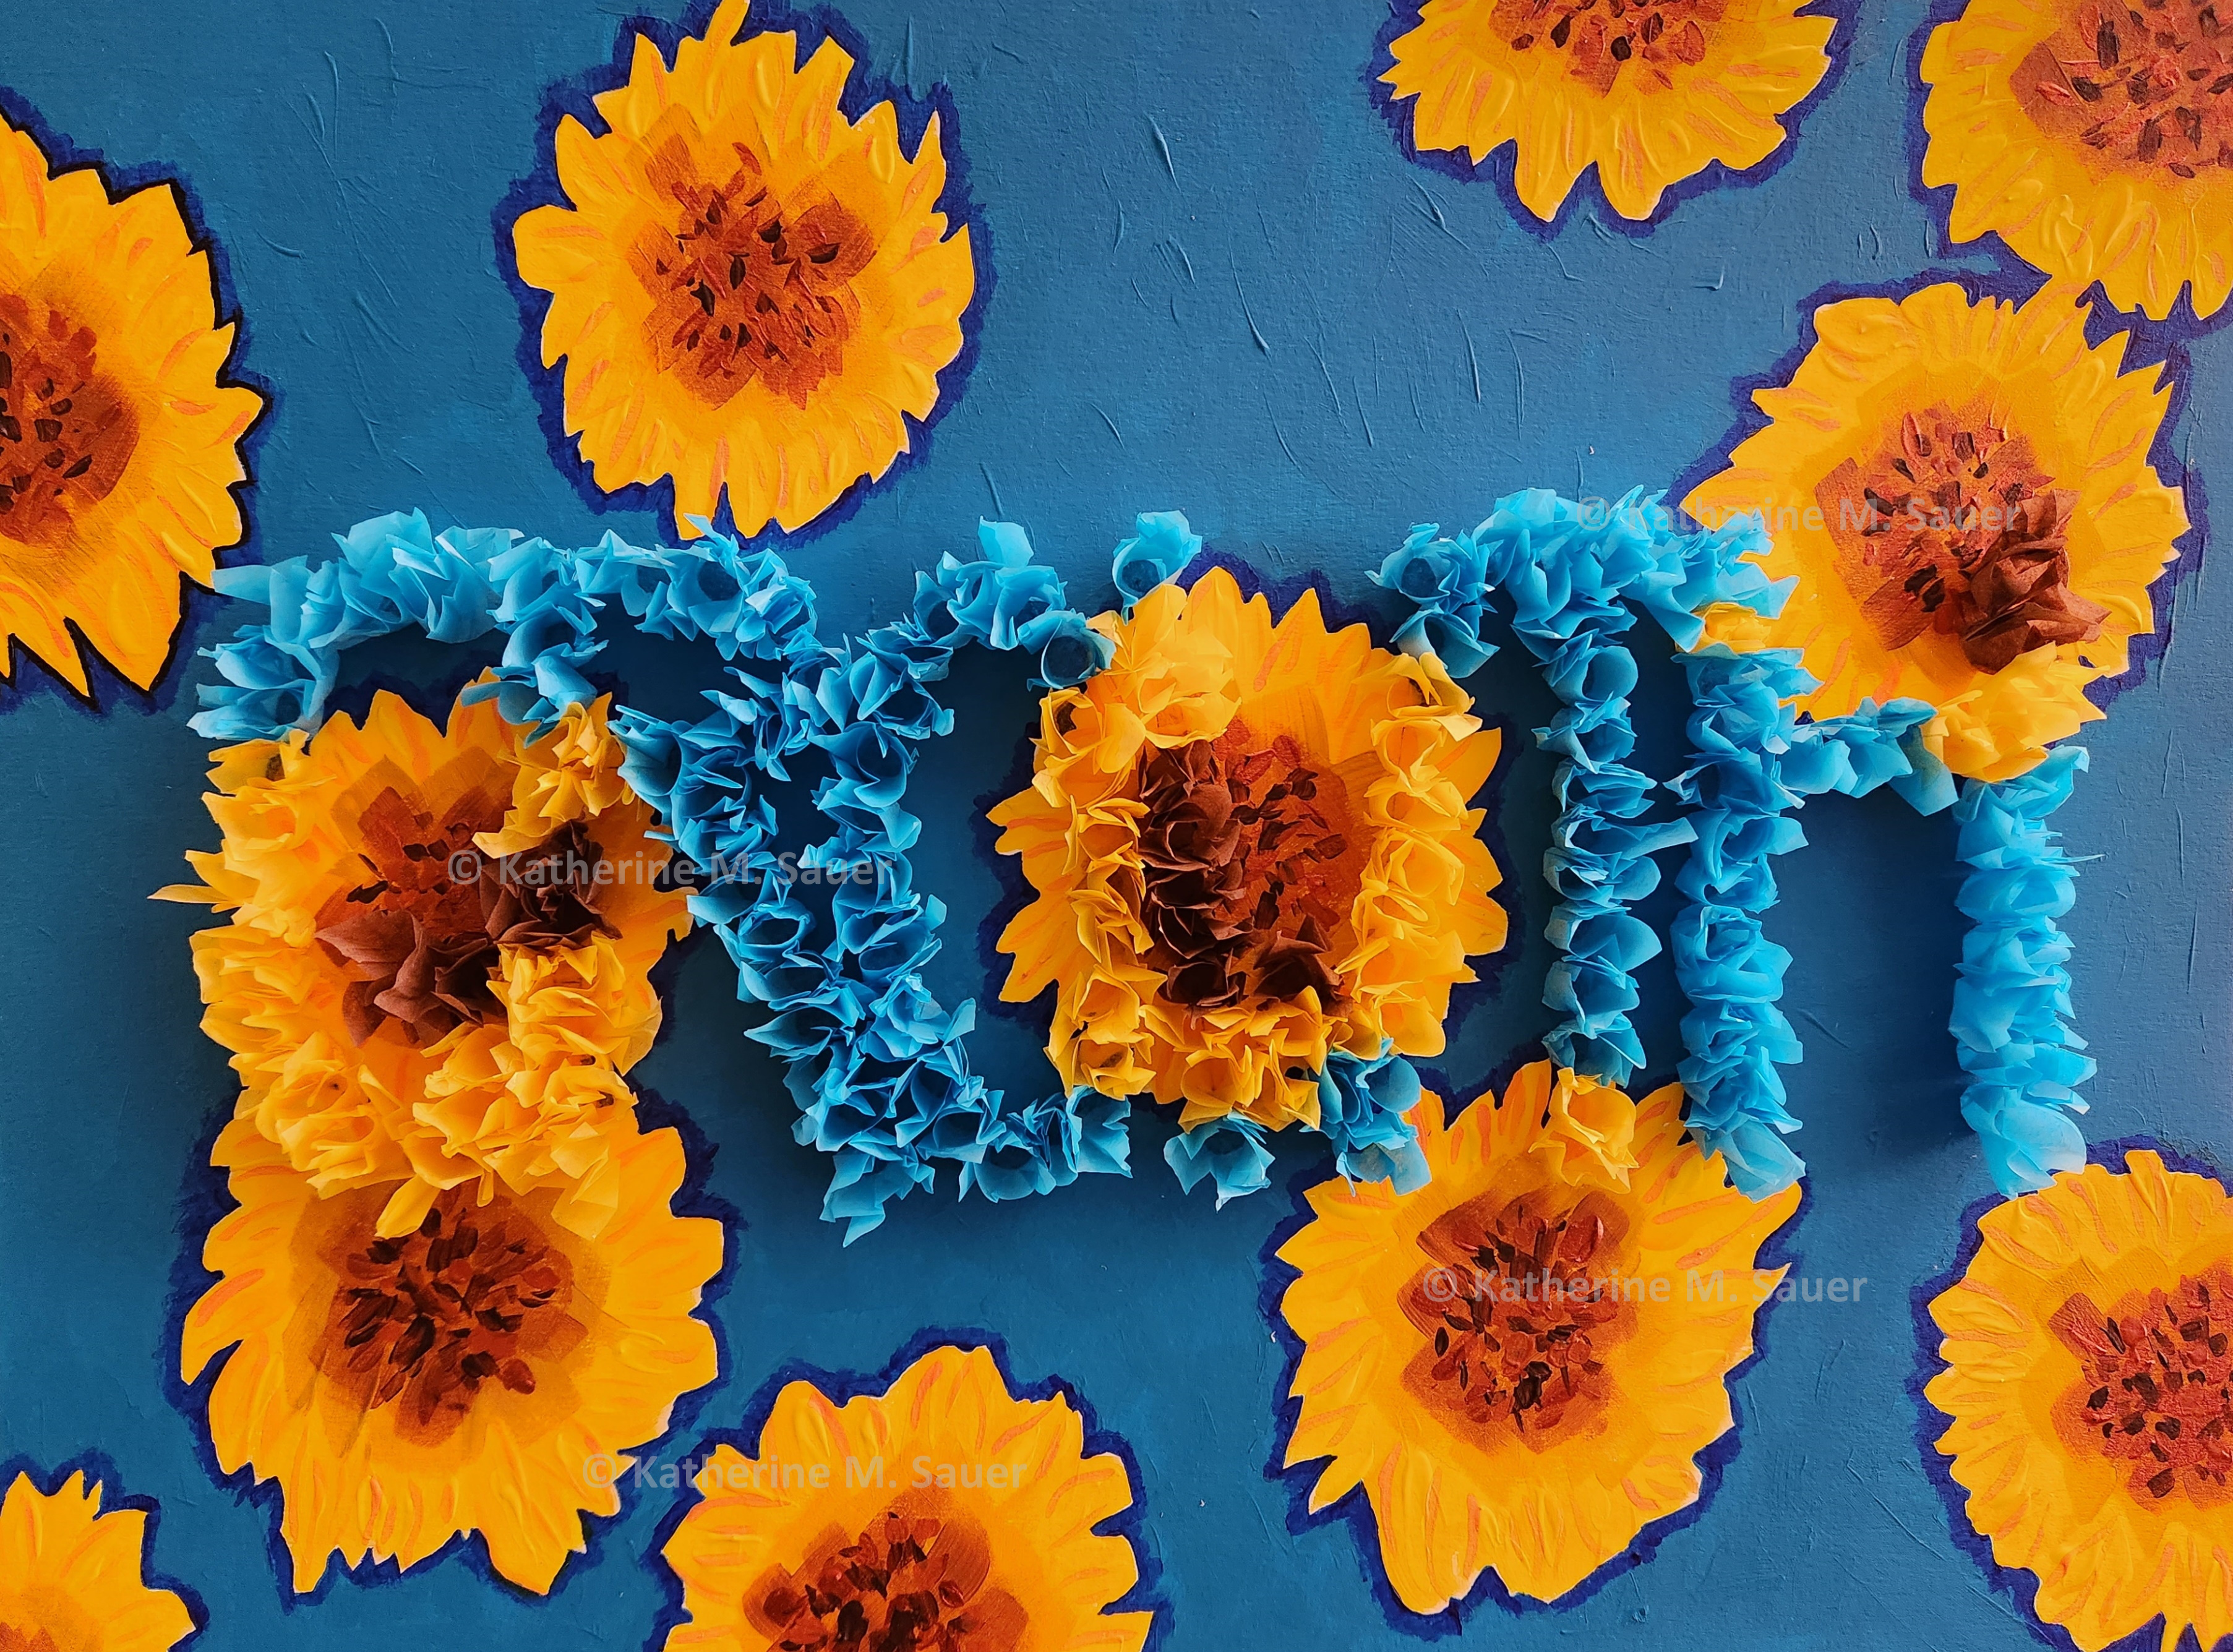 a painting of round orange flowers on a teal background with the word 'growth' created using tissue paper